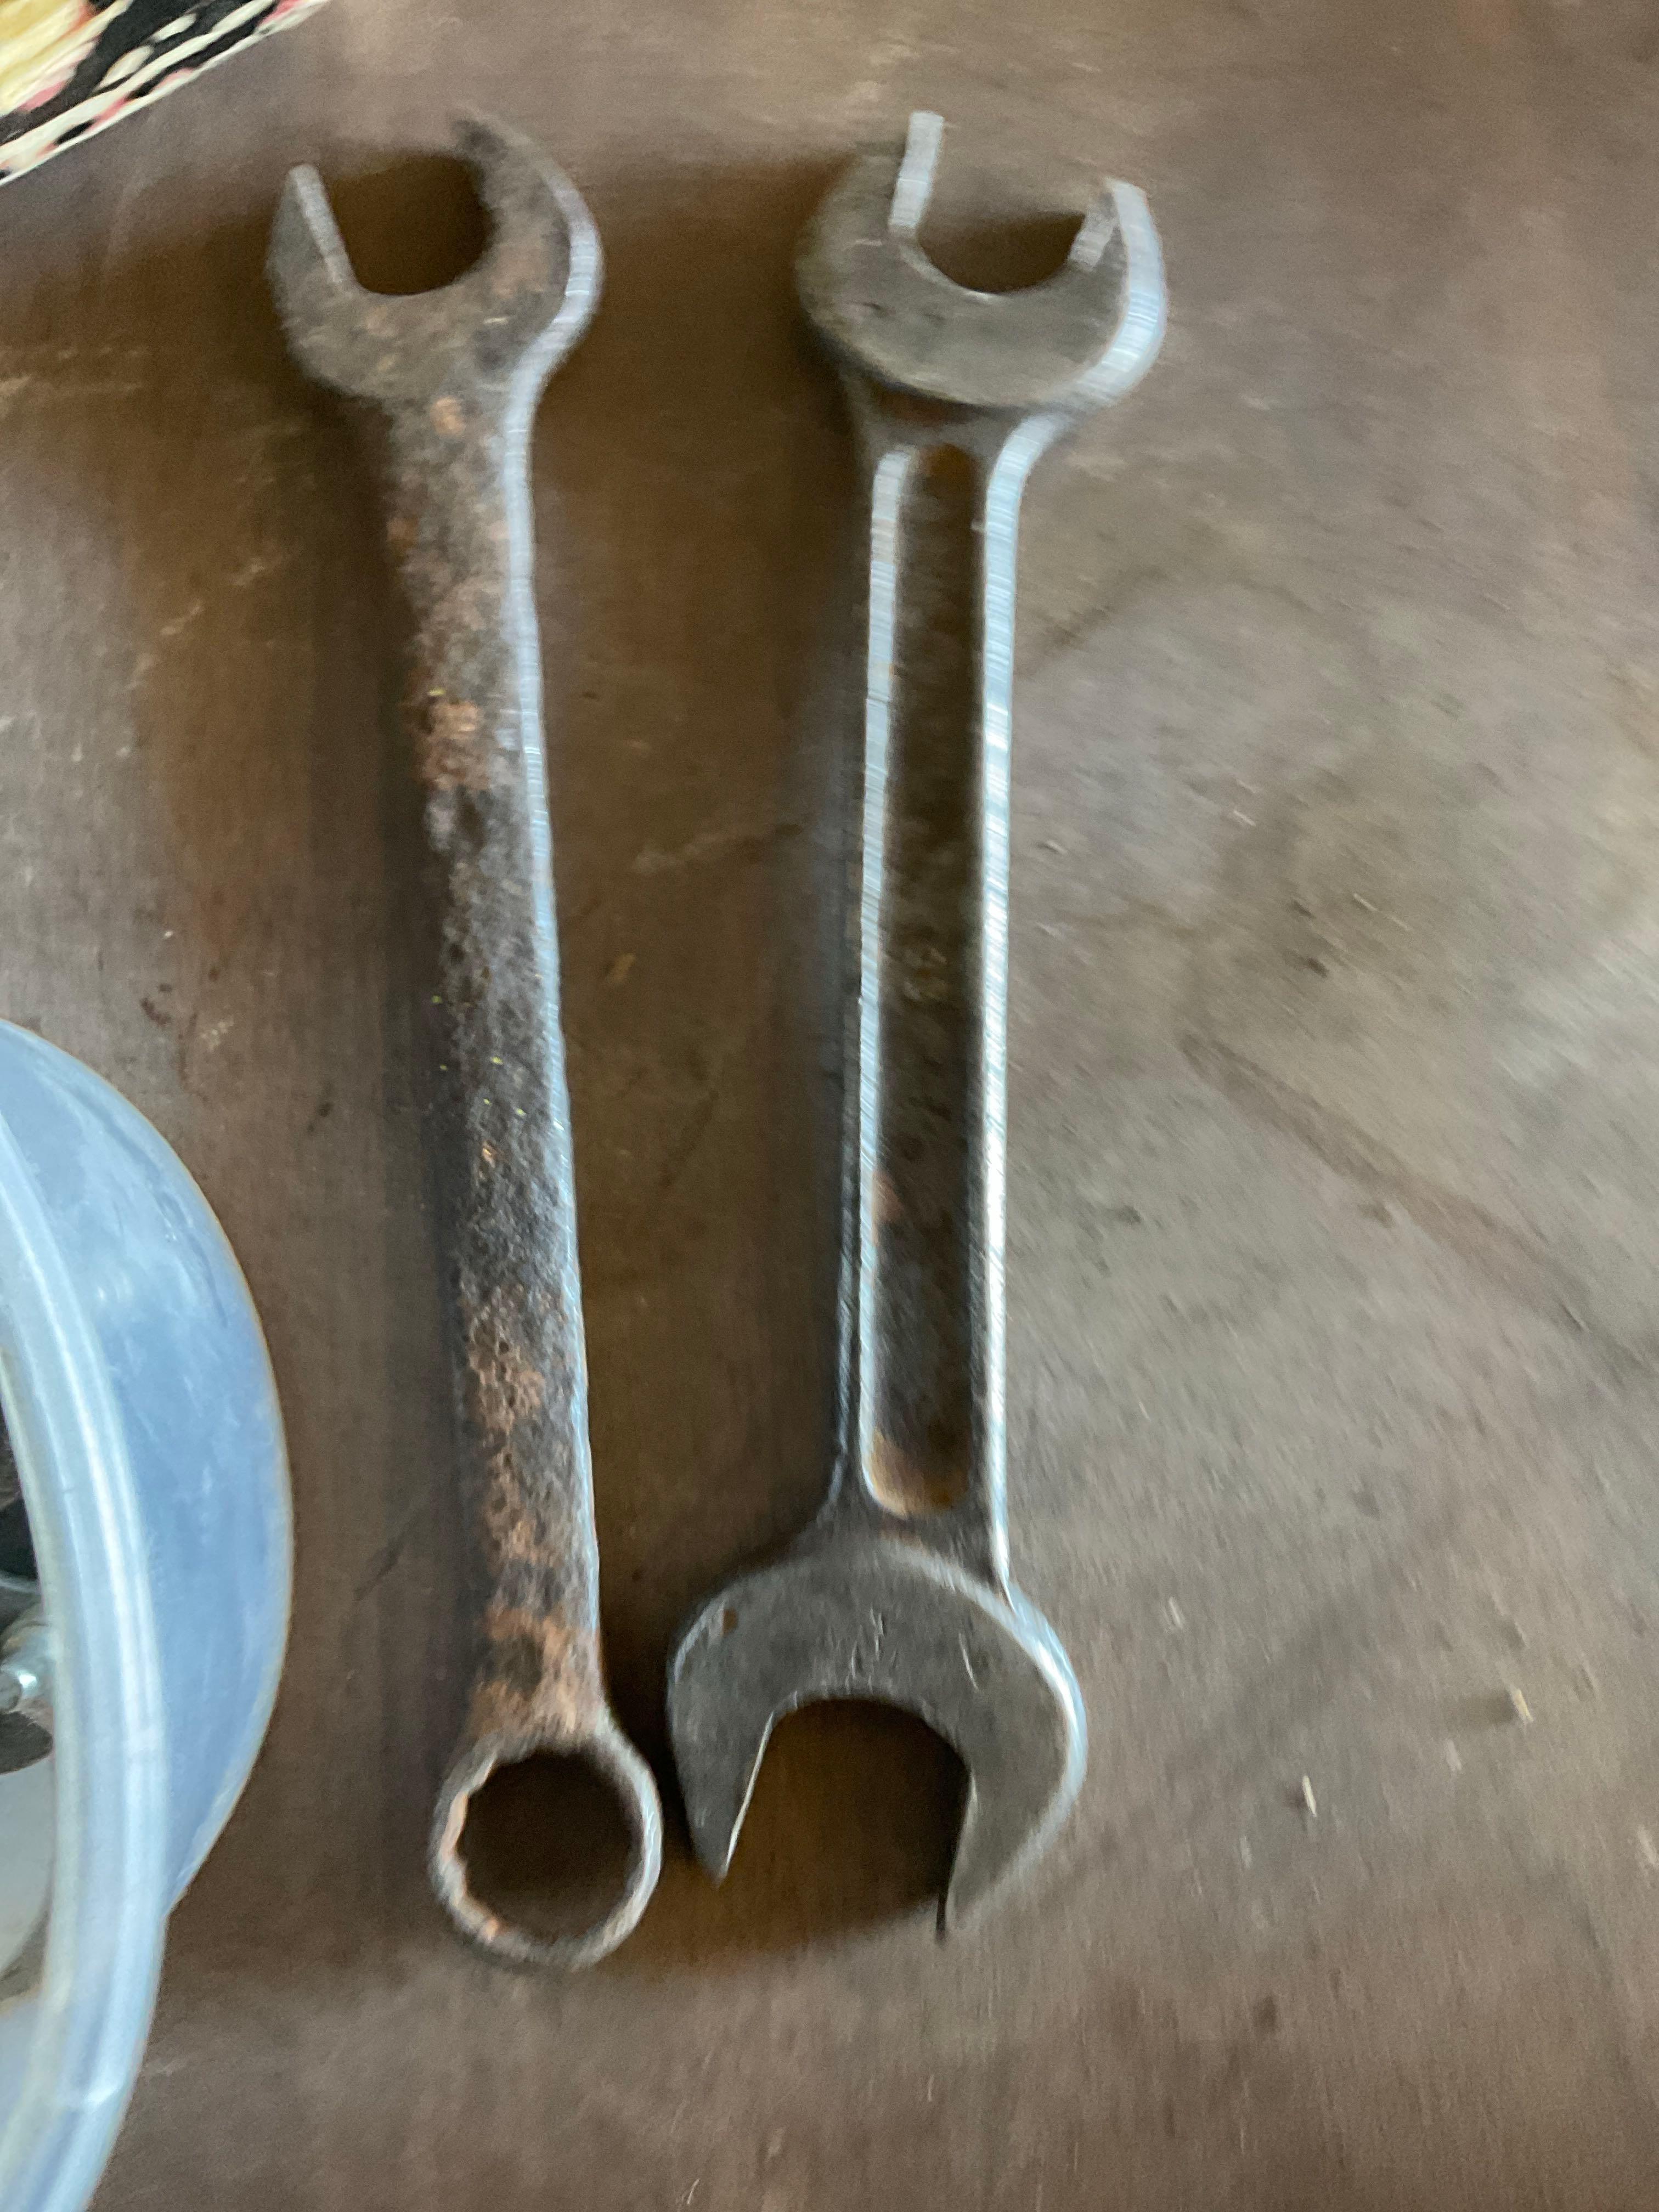 wrenches, and more